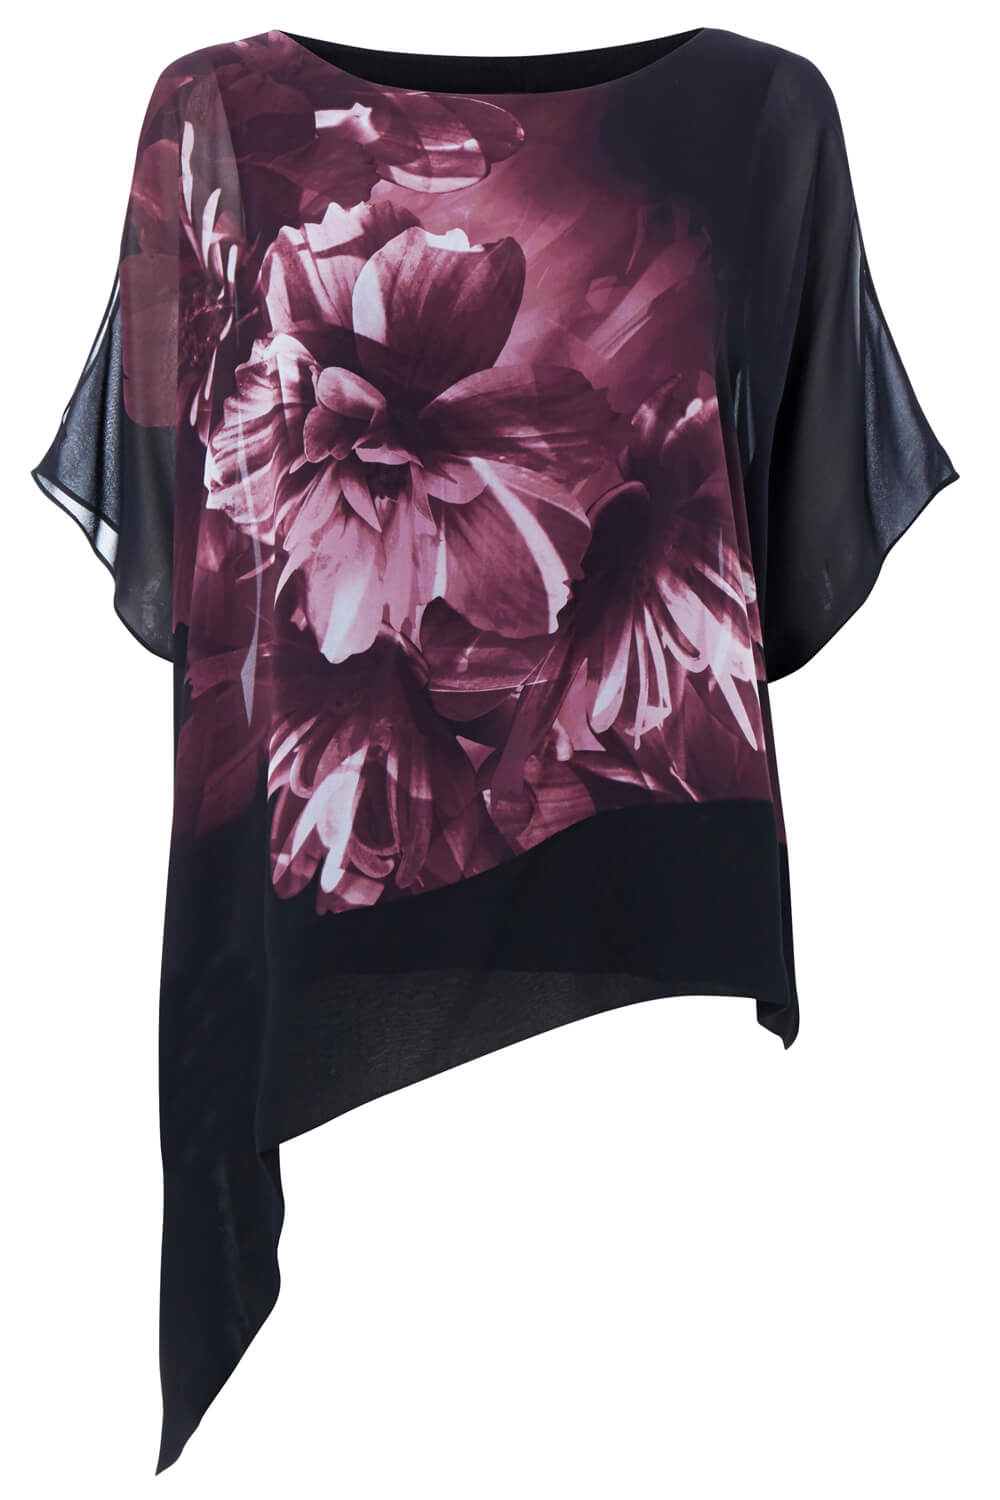 PINK Floral Print Asymmetric Overlay Top, Image 5 of 5